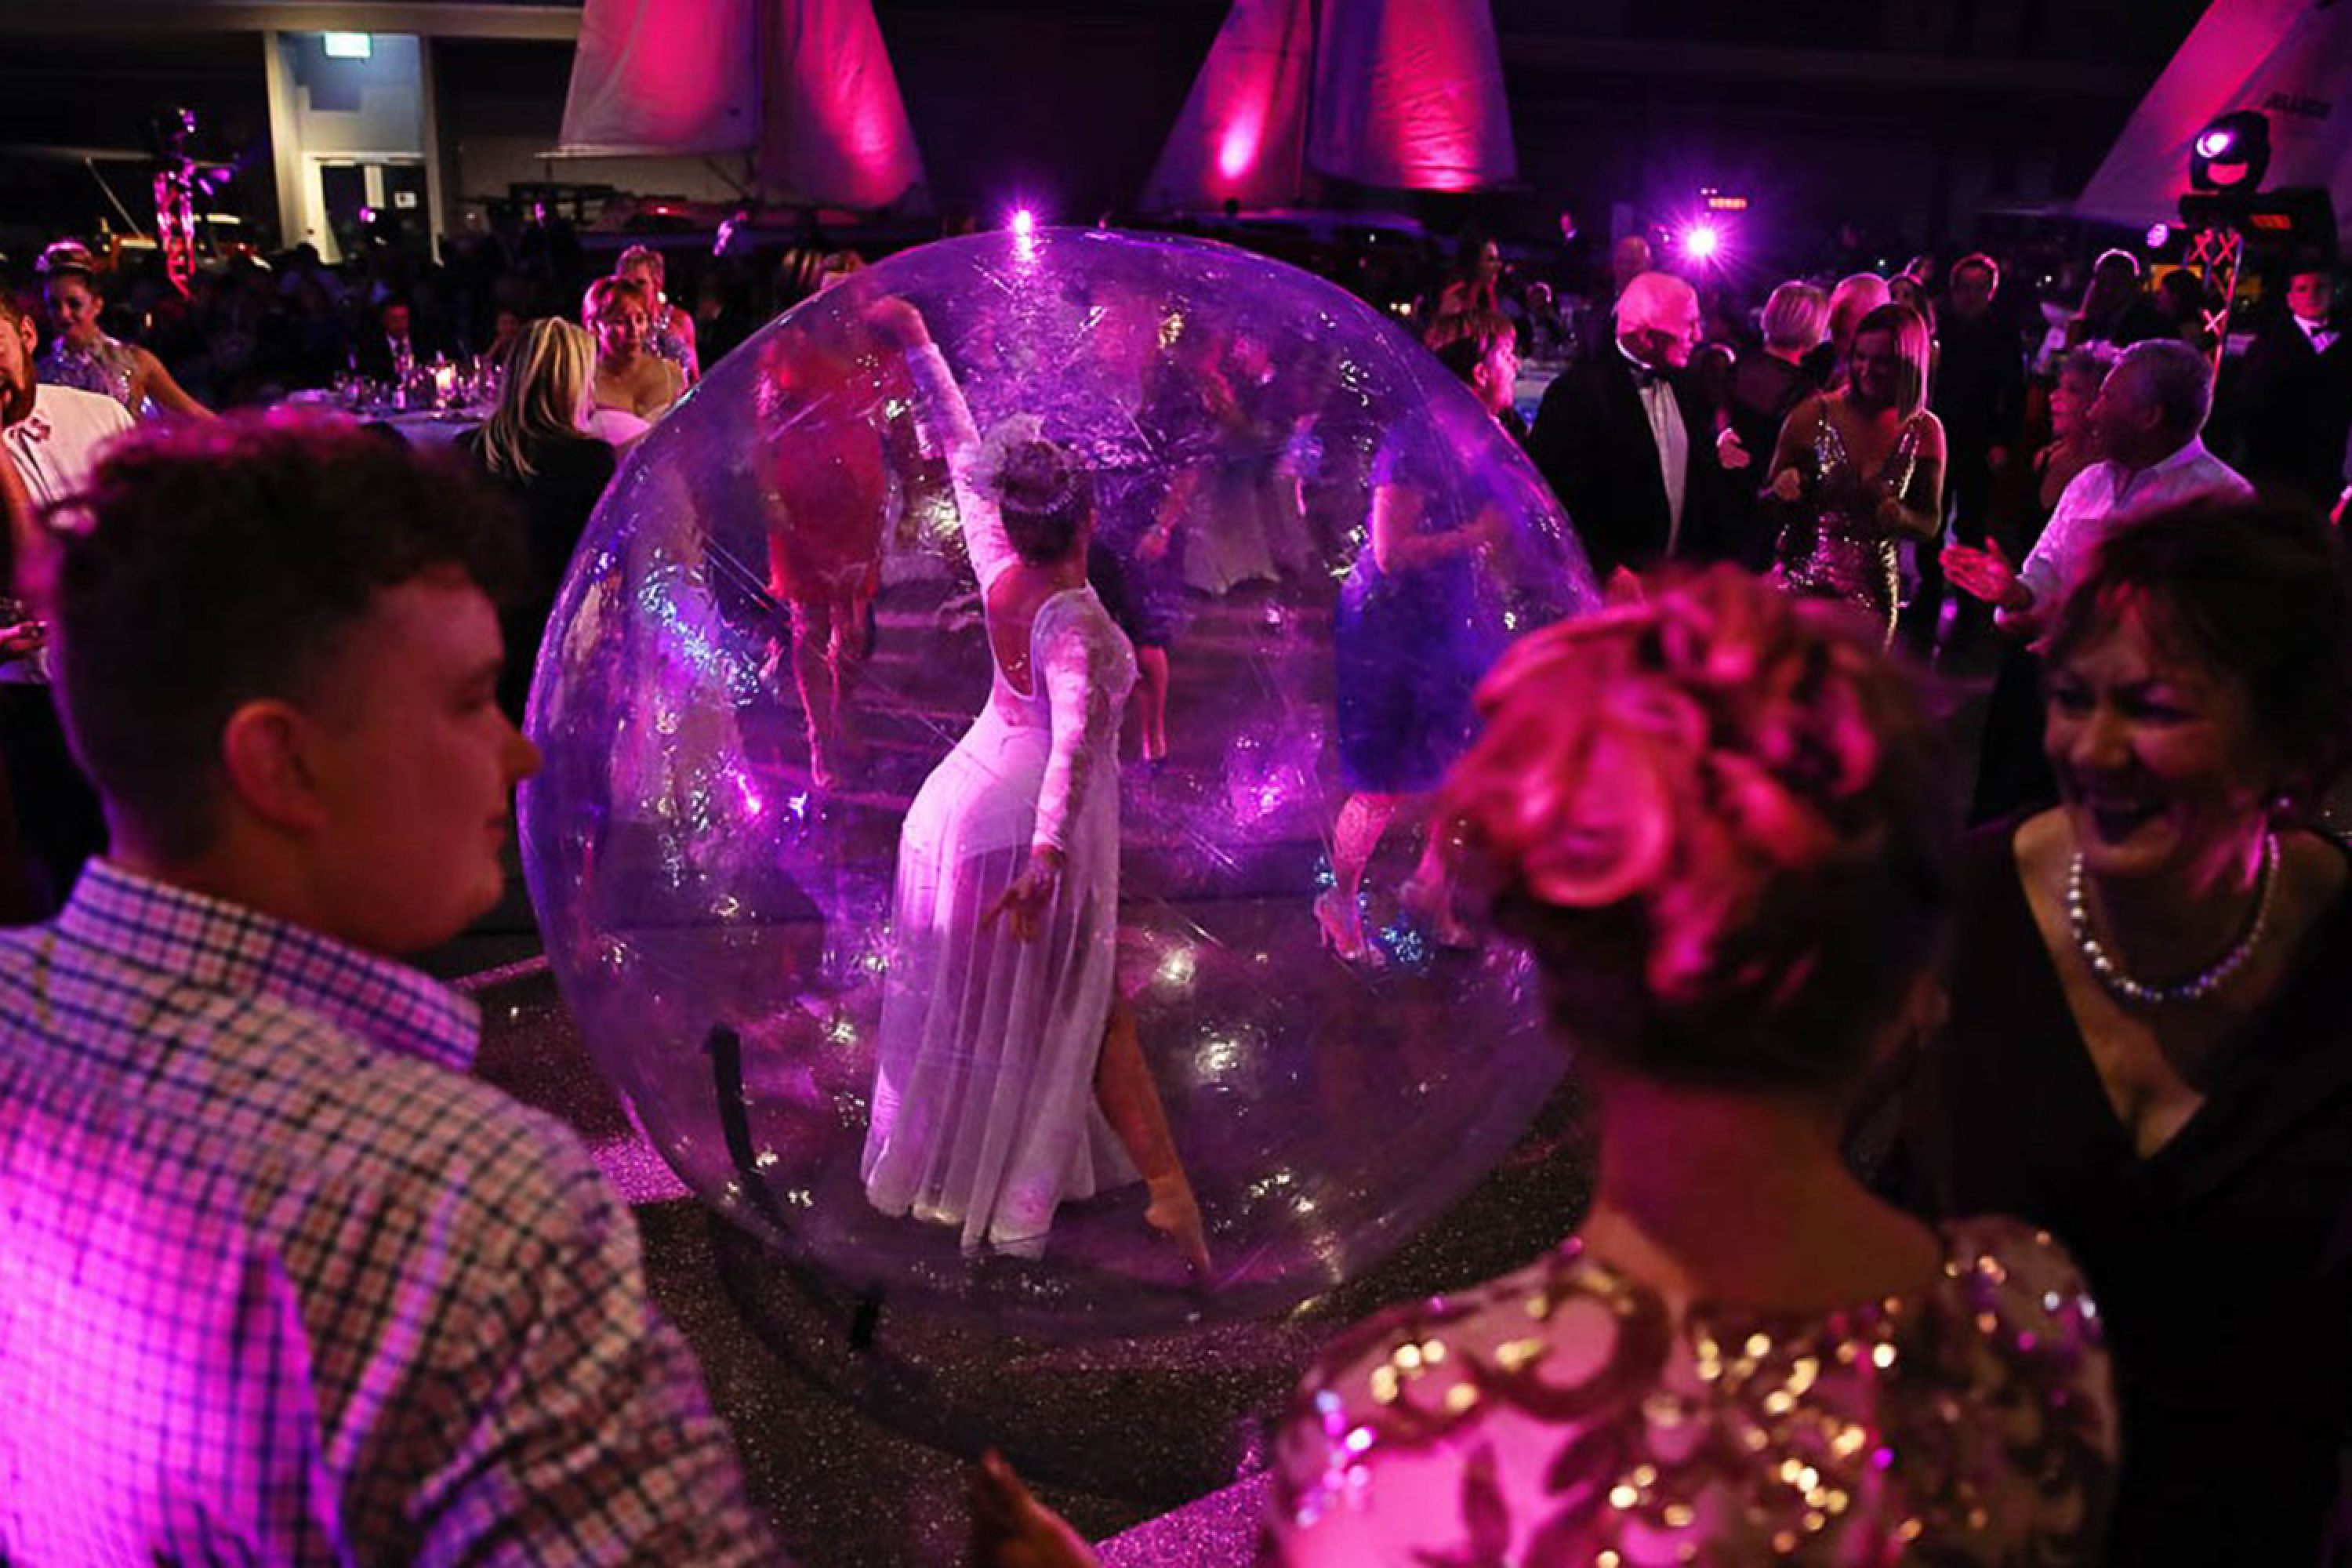 A dance floor with a dancer inside a bubble surrounded by people 